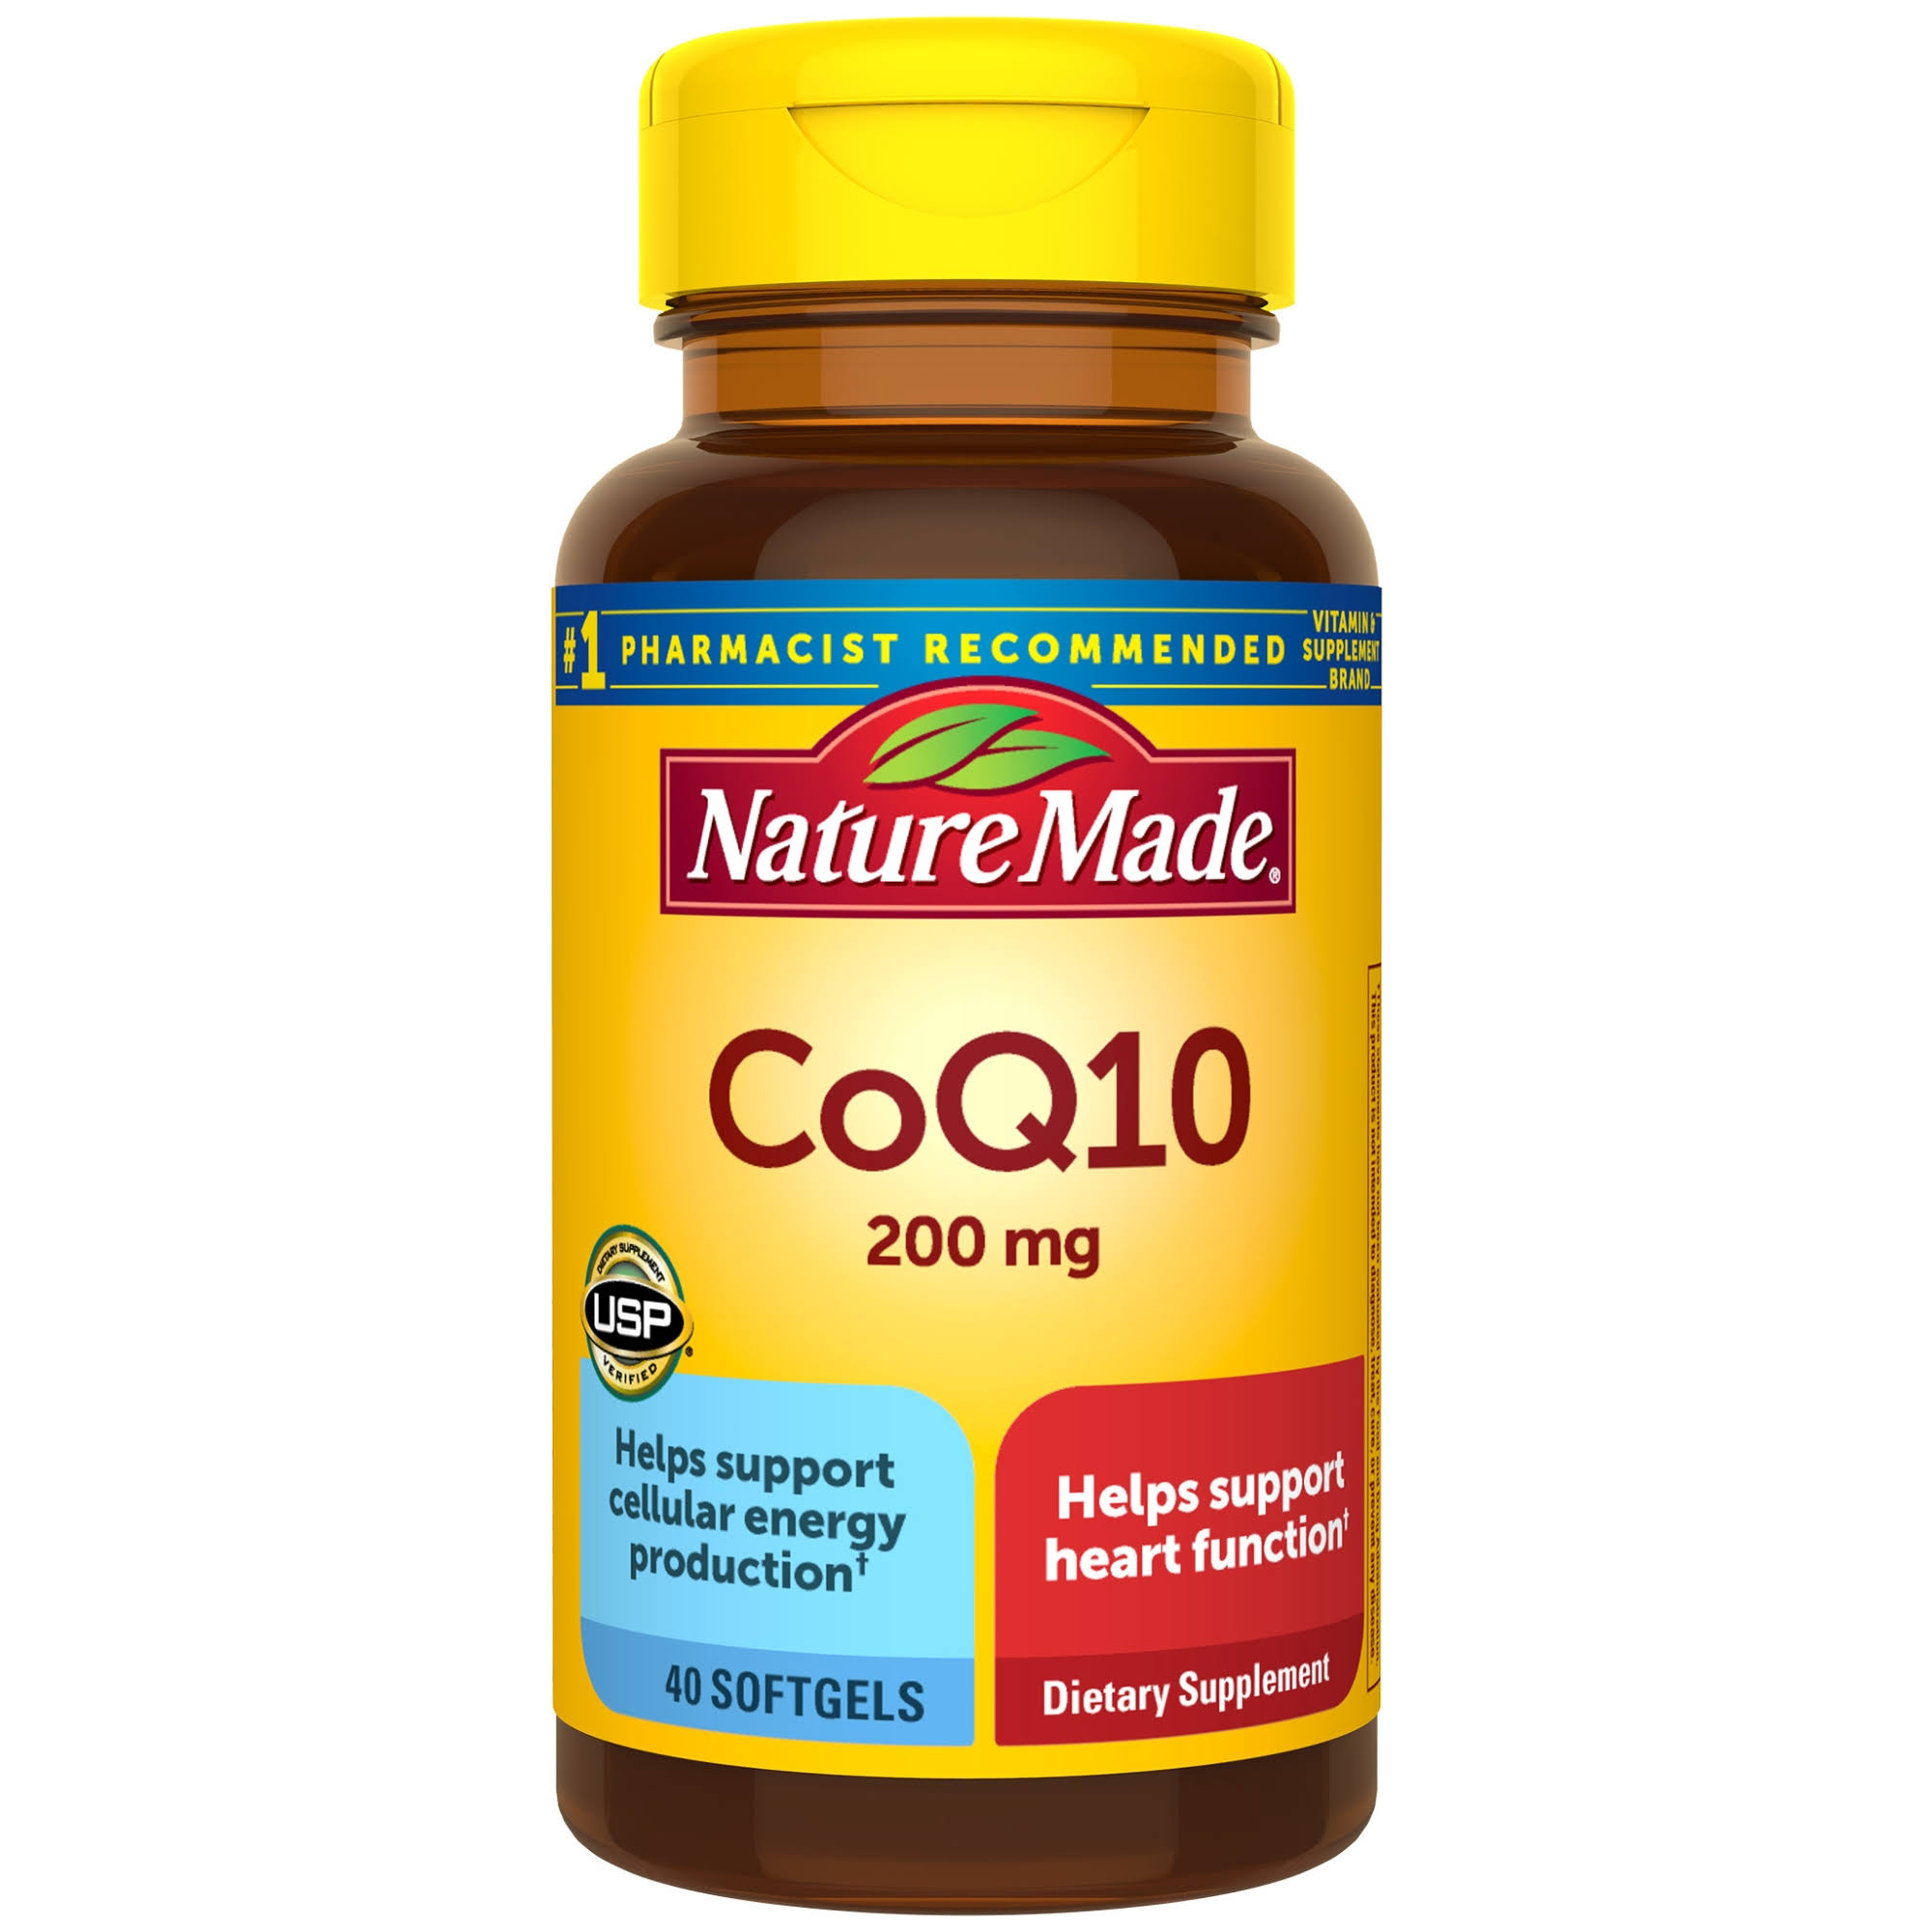 Nature Made Coq10 Dietary Supplement - 200mg, 40ct